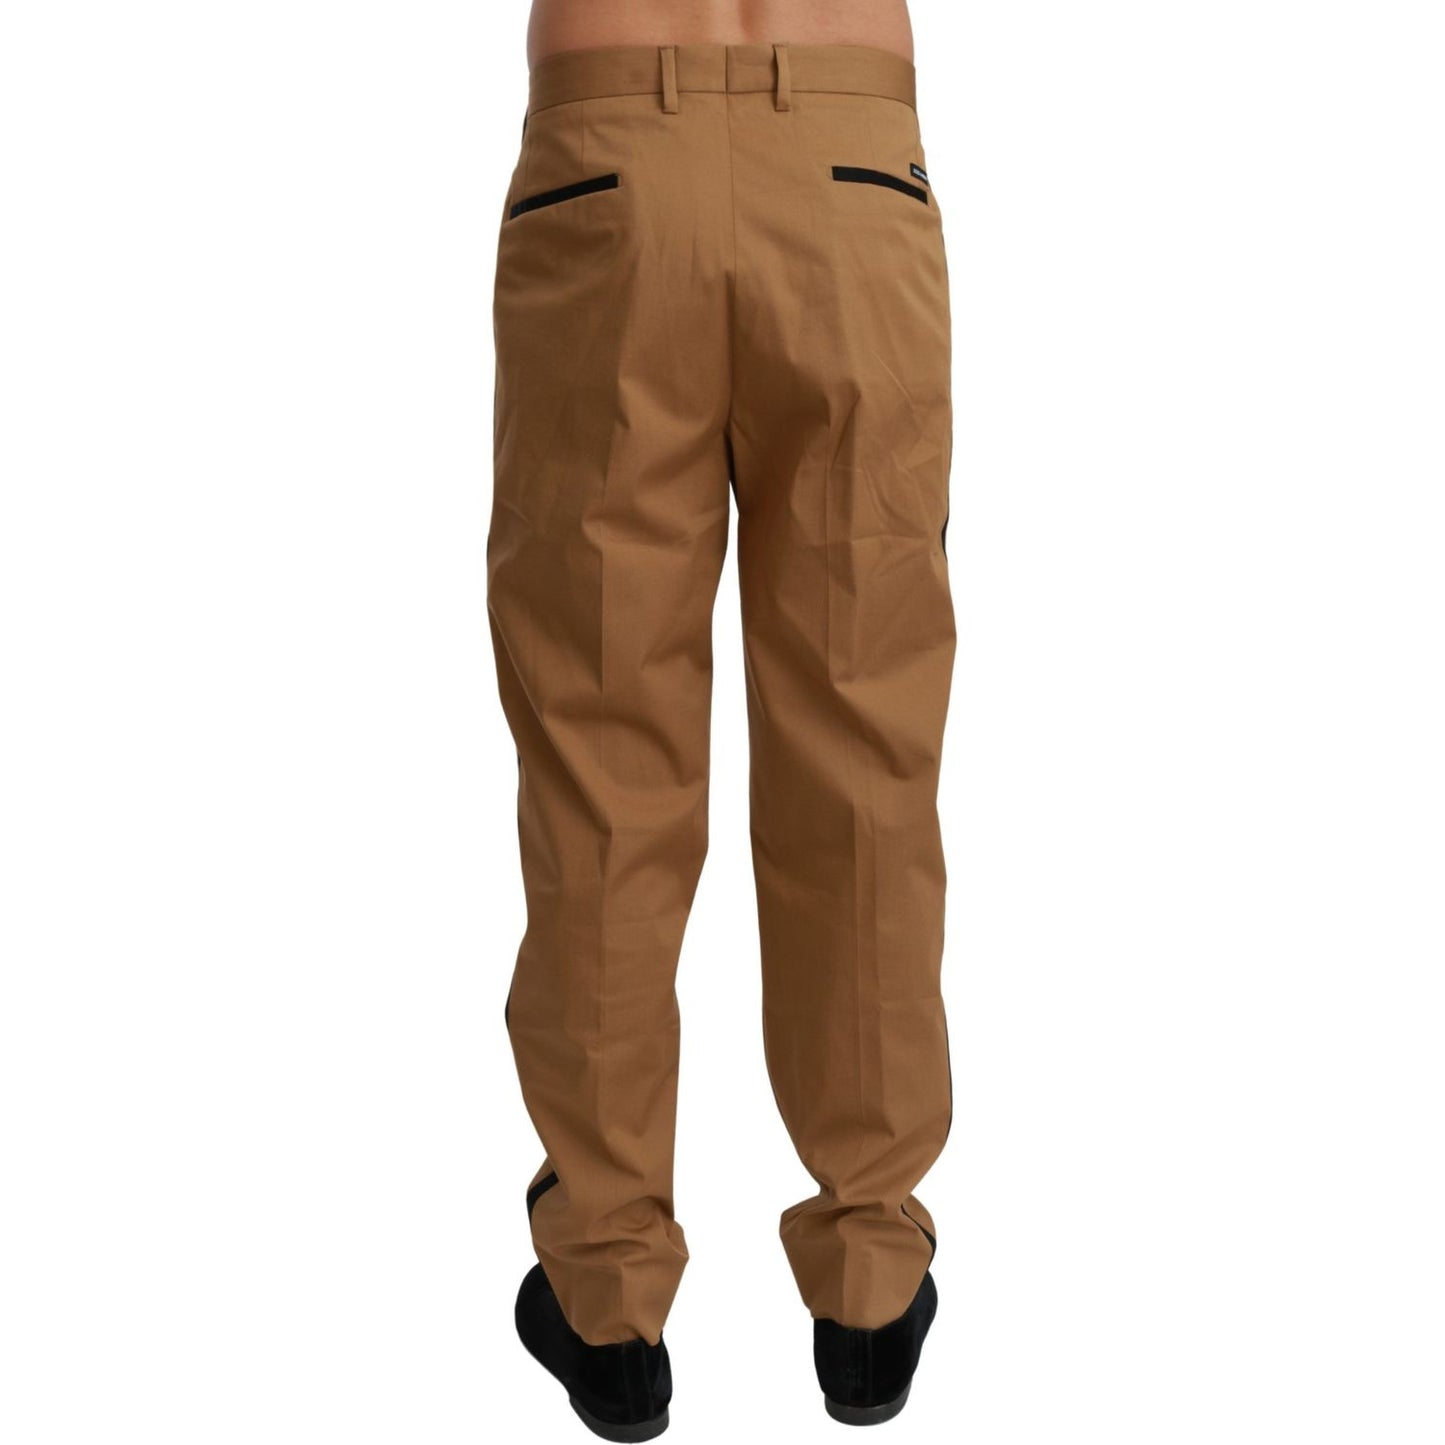 Dolce & Gabbana Elegant Slim Fit Brown Casual Pants brown-chinos-trousers-cotton-stretch-pants